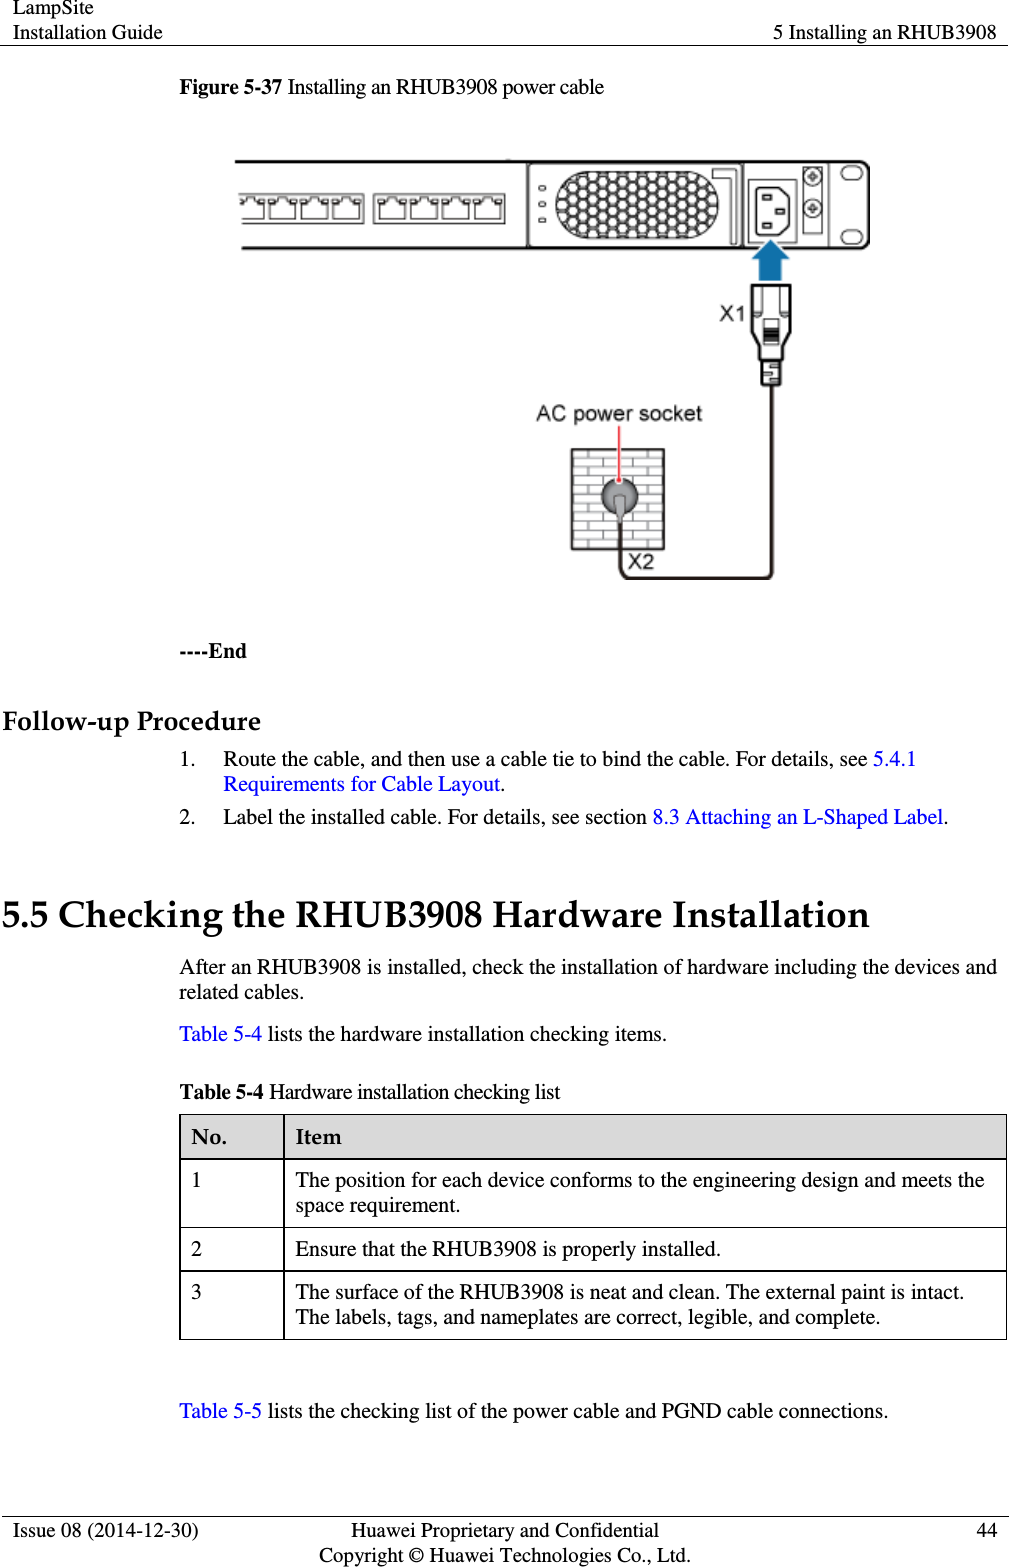 LampSite Installation Guide 5 Installing an RHUB3908  Issue 08 (2014-12-30) Huawei Proprietary and Confidential                                     Copyright © Huawei Technologies Co., Ltd. 44  Figure 5-37 Installing an RHUB3908 power cable   ----End Follow-up Procedure 1. Route the cable, and then use a cable tie to bind the cable. For details, see 5.4.1 Requirements for Cable Layout. 2. Label the installed cable. For details, see section 8.3 Attaching an L-Shaped Label. 5.5 Checking the RHUB3908 Hardware Installation After an RHUB3908 is installed, check the installation of hardware including the devices and related cables.   Table 5-4 lists the hardware installation checking items. Table 5-4 Hardware installation checking list No. Item 1 The position for each device conforms to the engineering design and meets the space requirement.   2 Ensure that the RHUB3908 is properly installed. 3 The surface of the RHUB3908 is neat and clean. The external paint is intact. The labels, tags, and nameplates are correct, legible, and complete.  Table 5-5 lists the checking list of the power cable and PGND cable connections. 